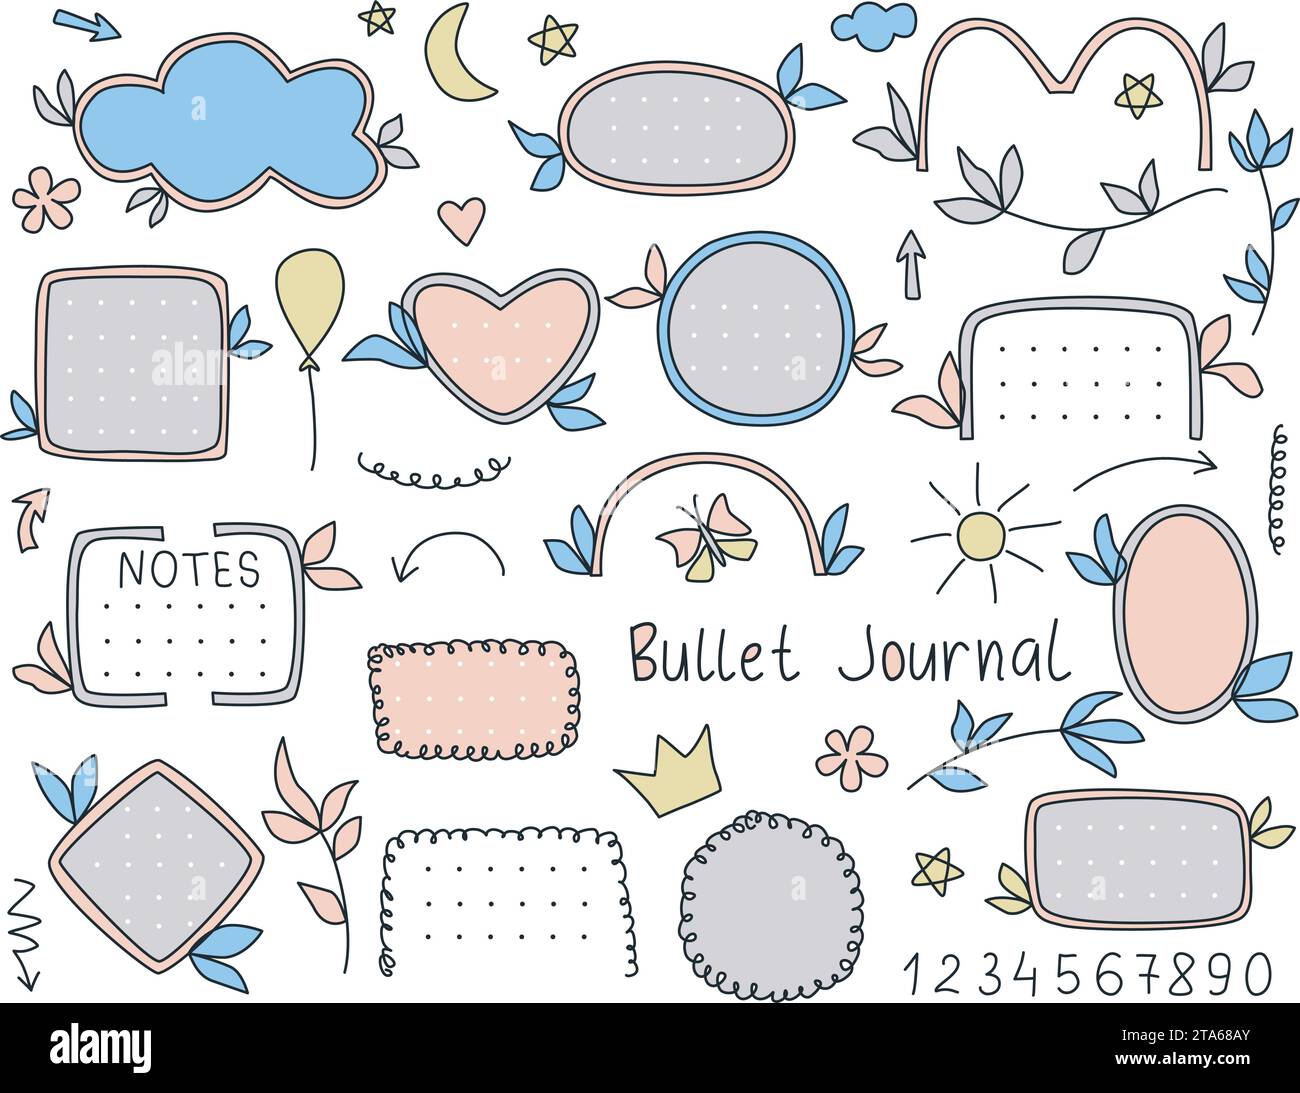 https://c8.alamy.com/comp/2TA68AY/bullet-journal-hand-drawn-set-simple-graphic-elements-for-keeping-diary-notes-and-journal-frame-rim-numbers-arrow-heart-moon-squiggle-2TA68AY.jpg